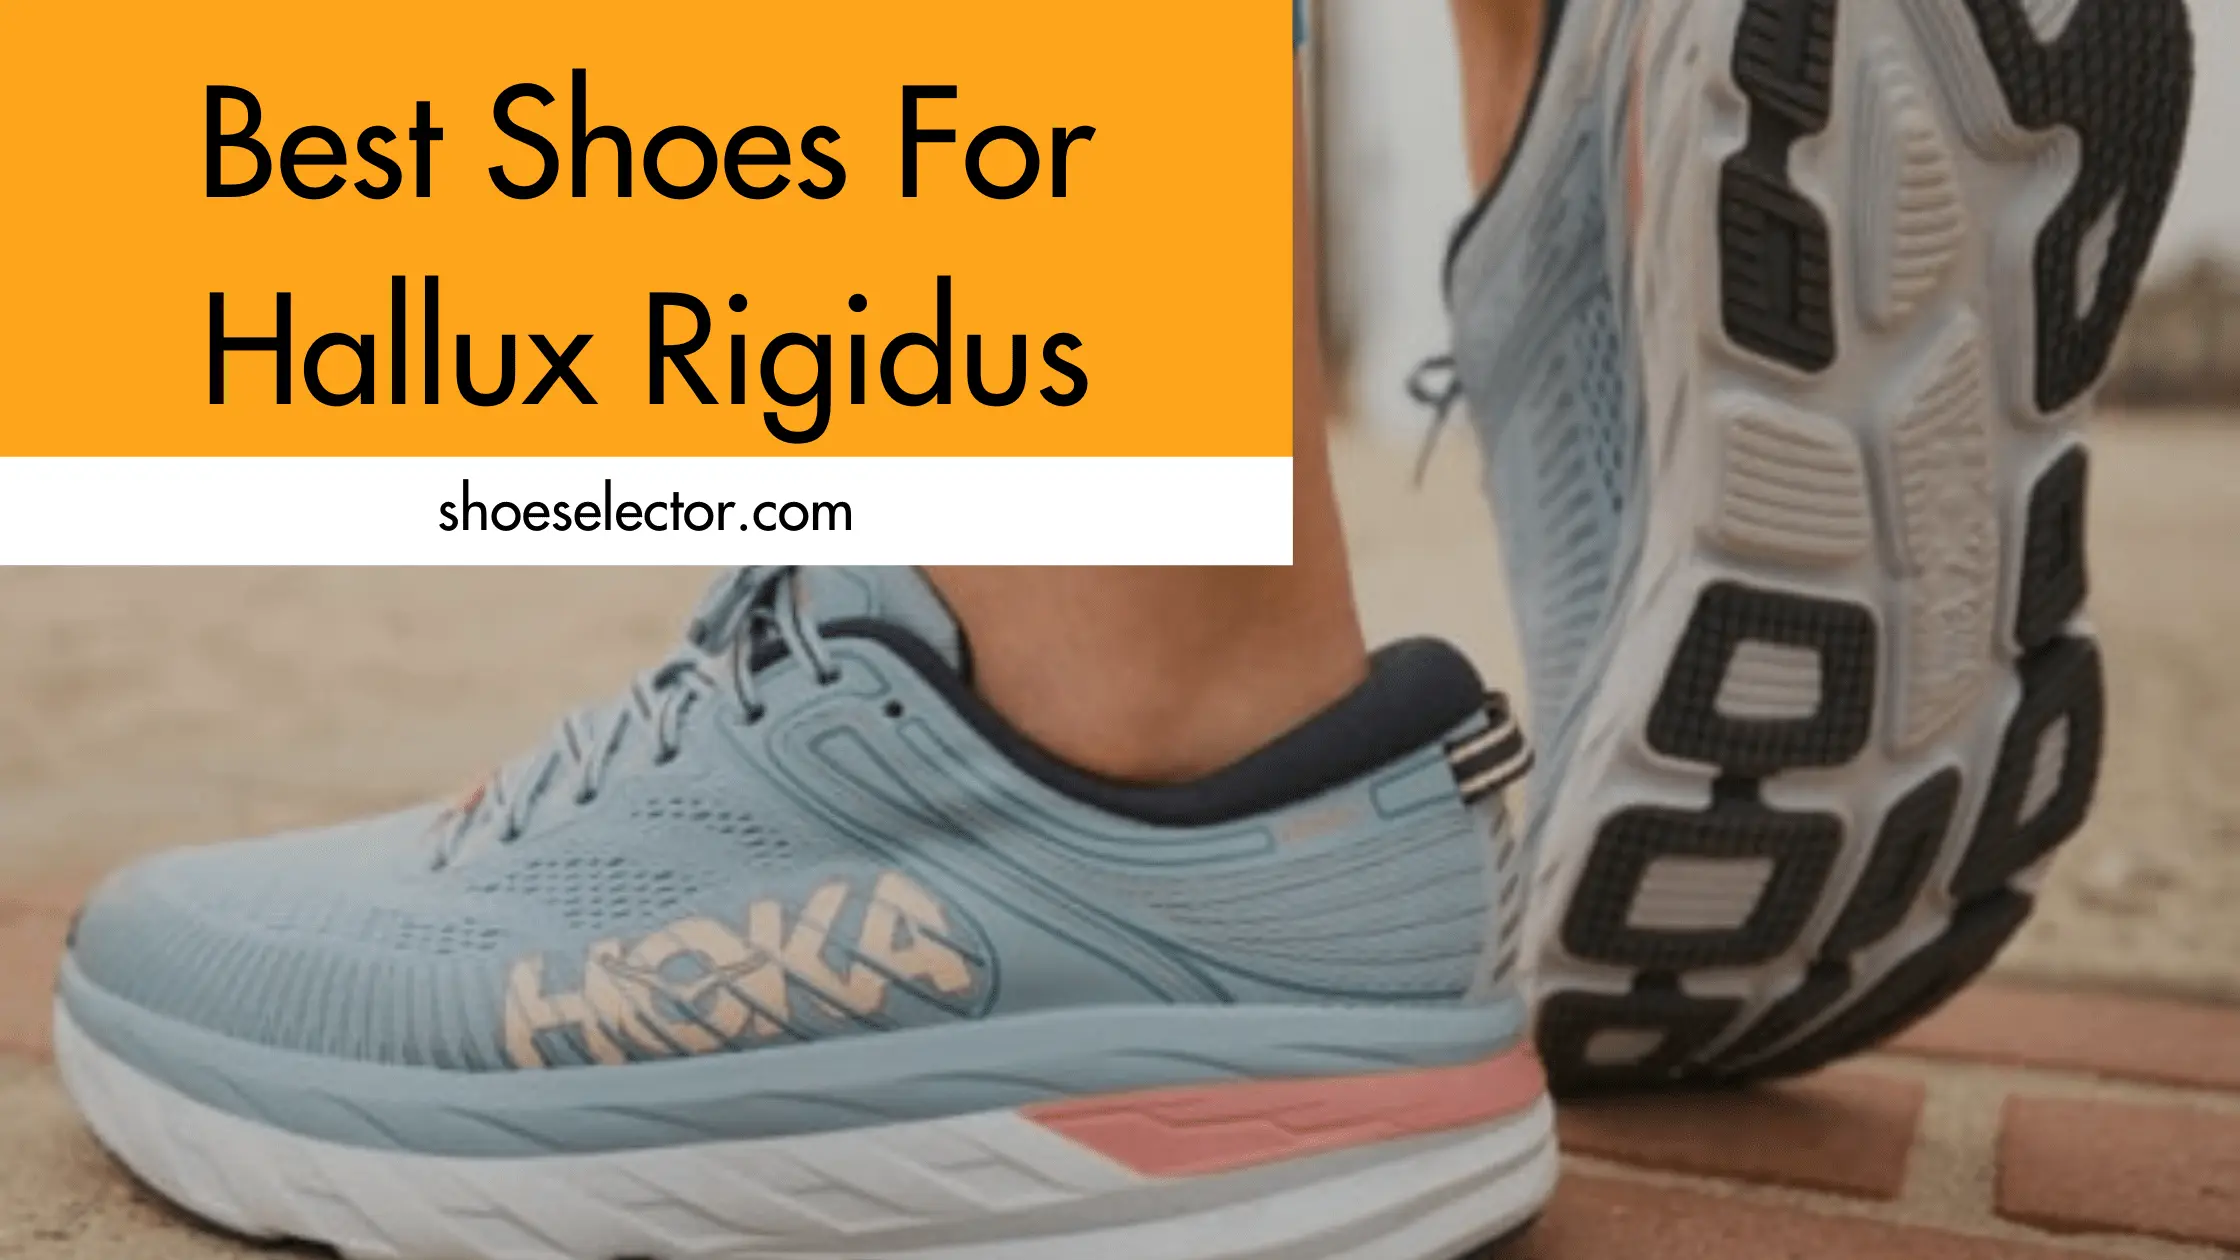 Best Shoes For Hallux Rigidus - Reviews By Expert